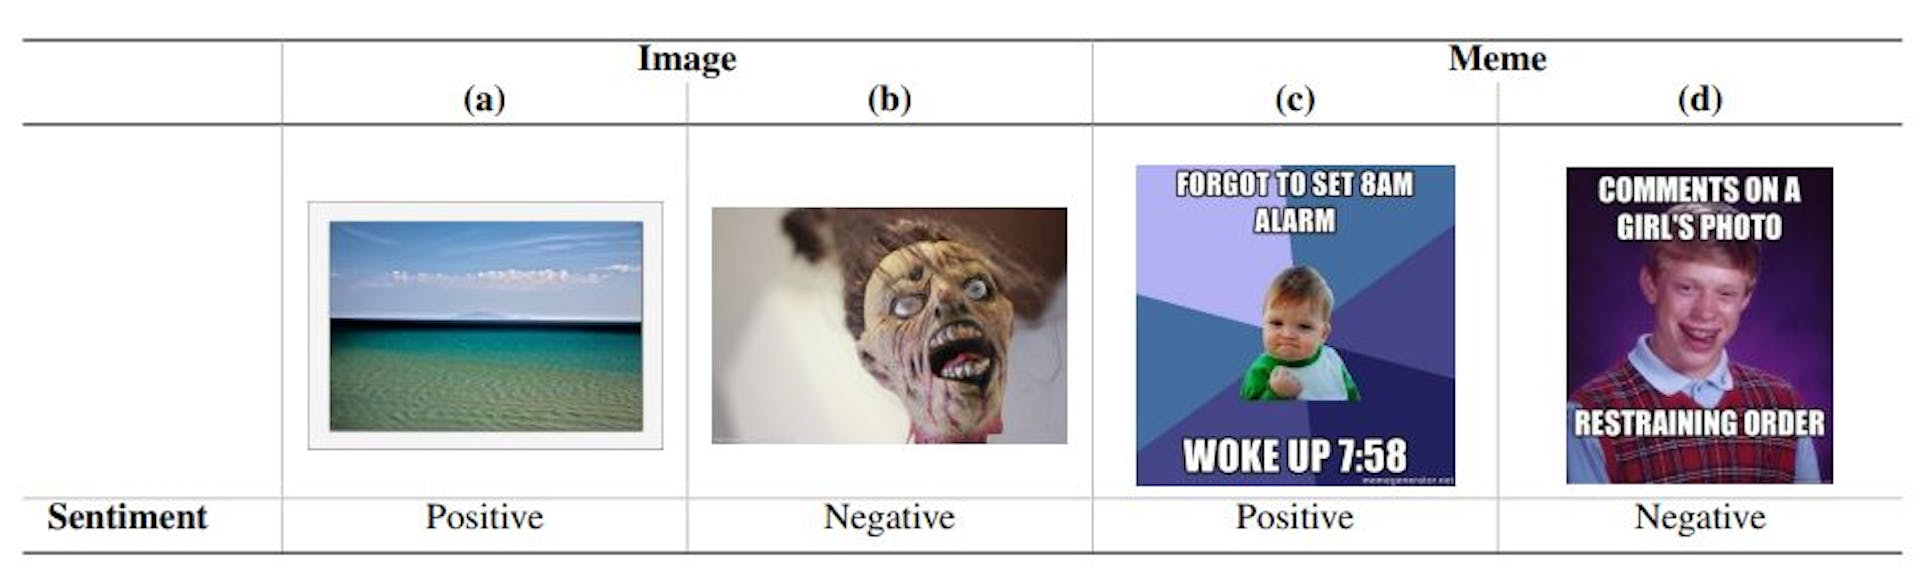 Table 3: Example unimodal images and multimodal memes showing distinct visual symbols.